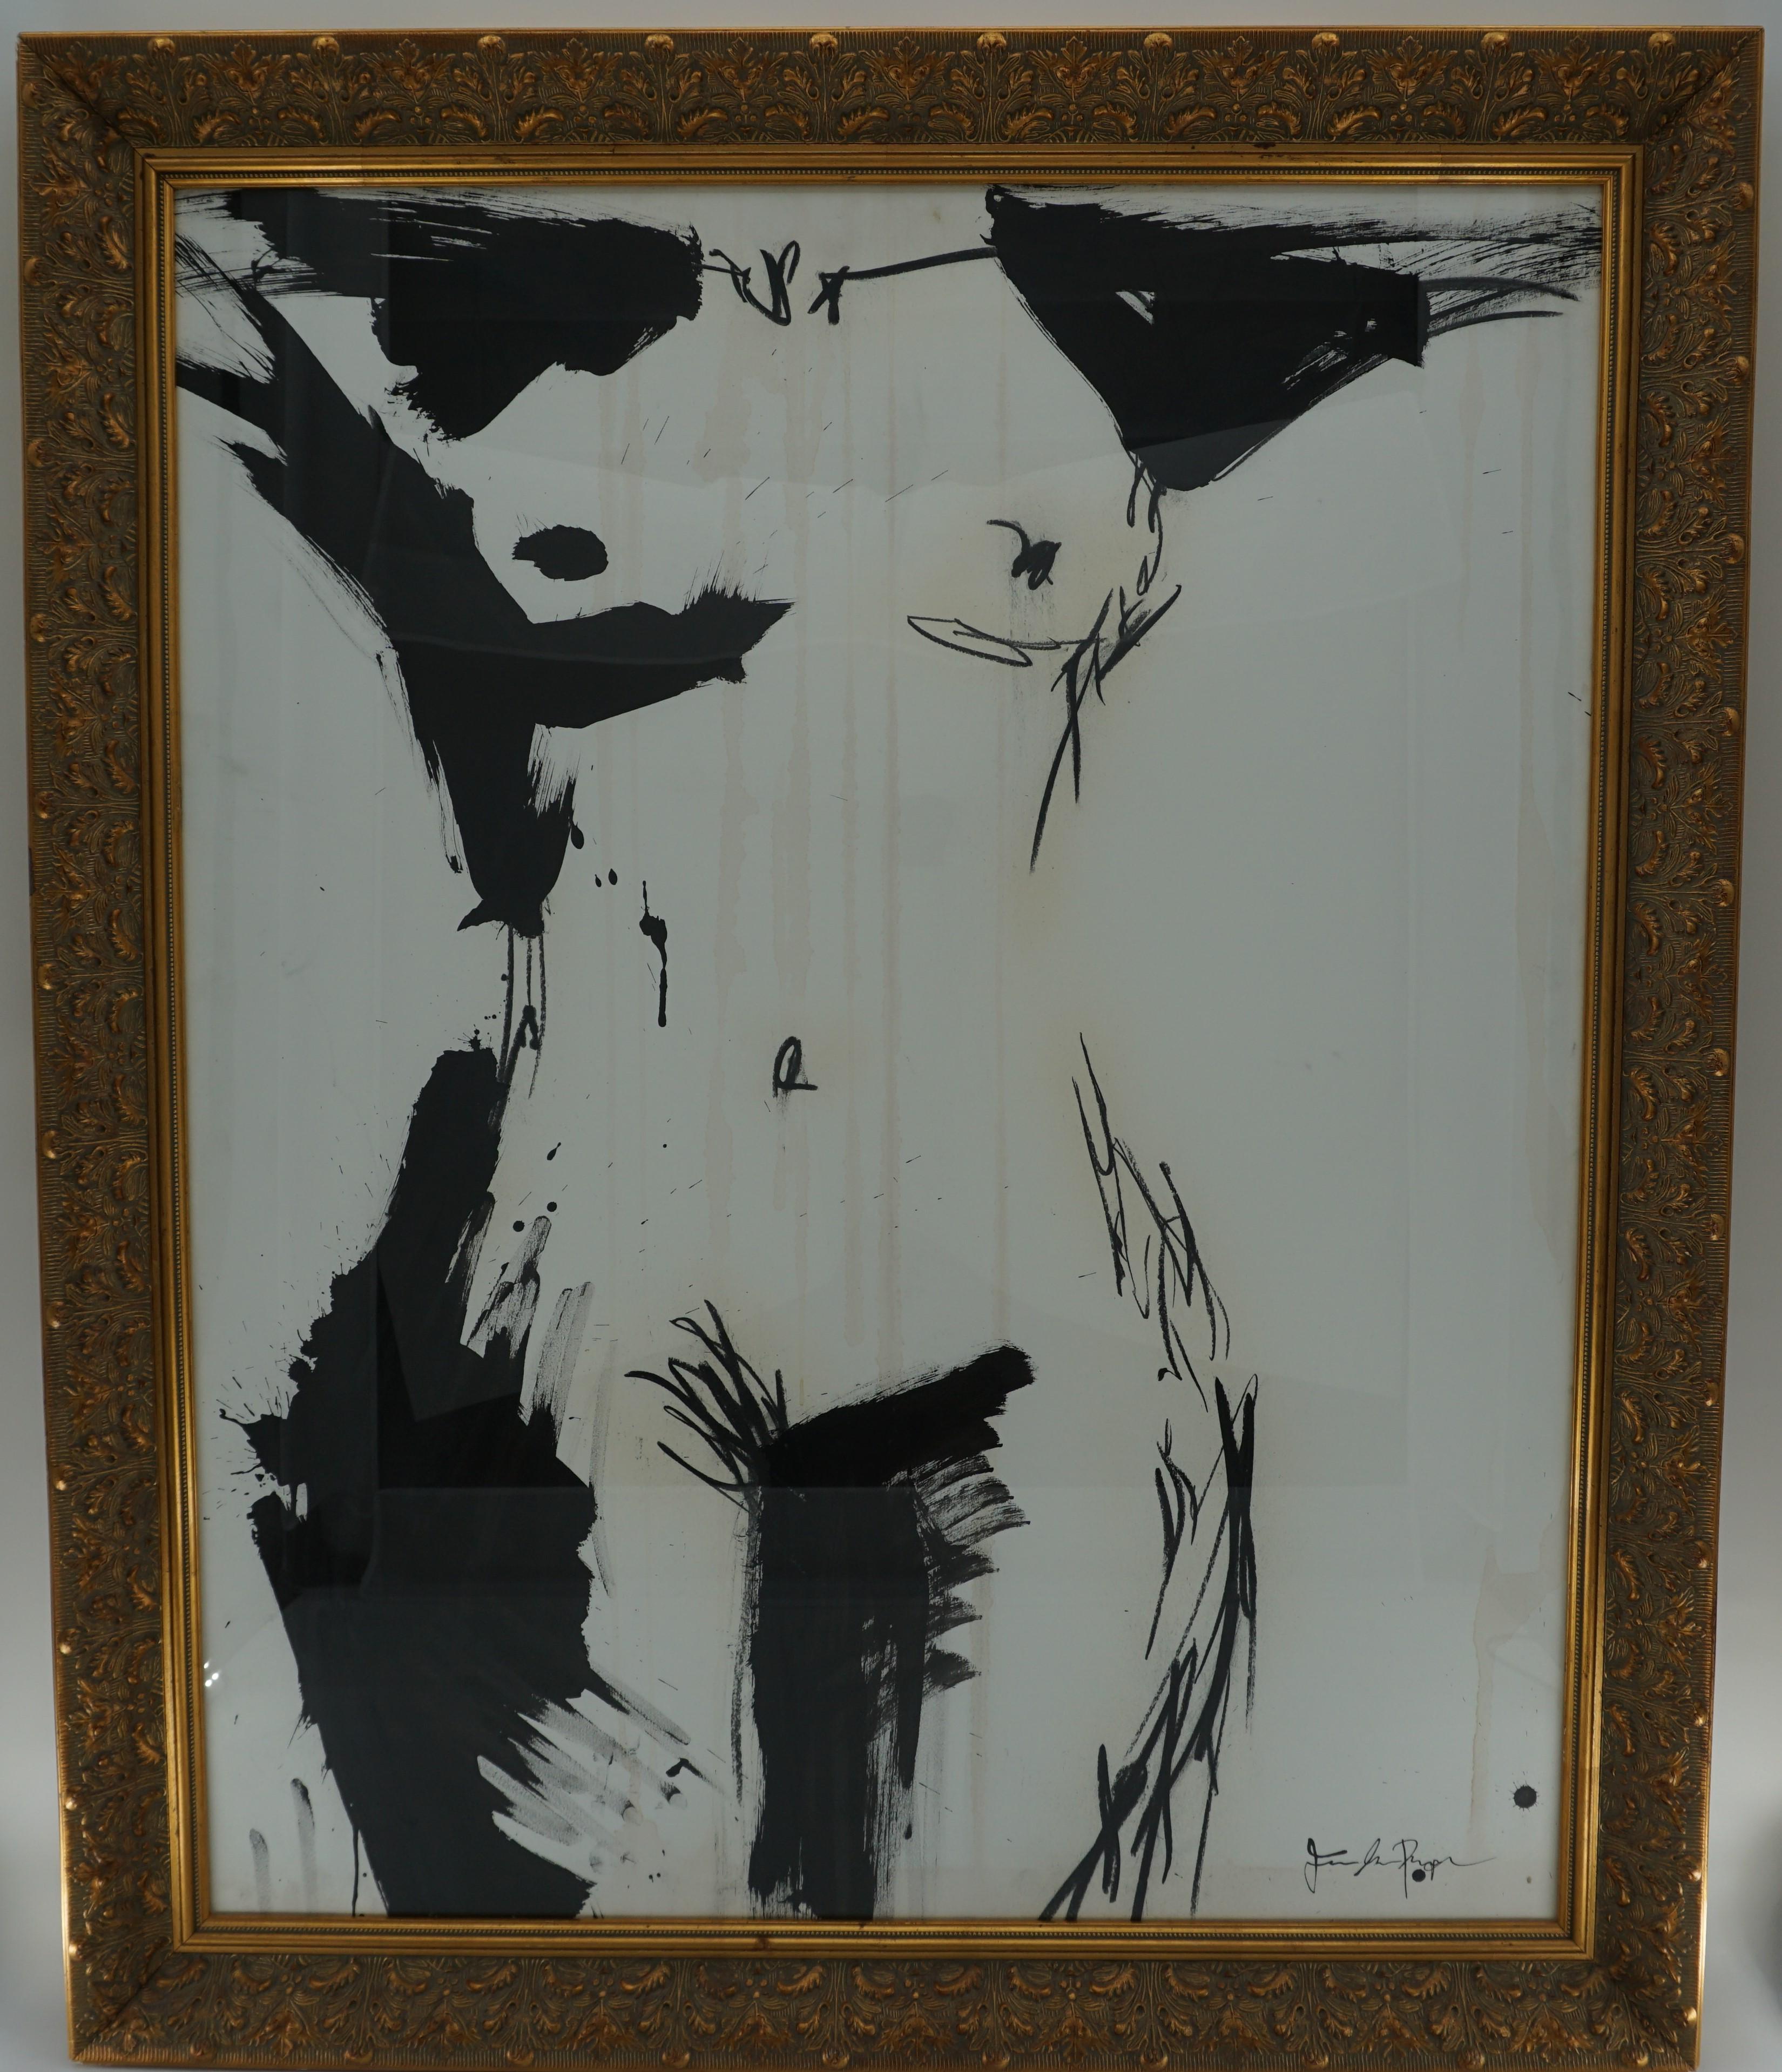 American Nude Painting by Jenna Snyder-Phillips, 2012, with Gold Frame, Sumi Ink on Paper